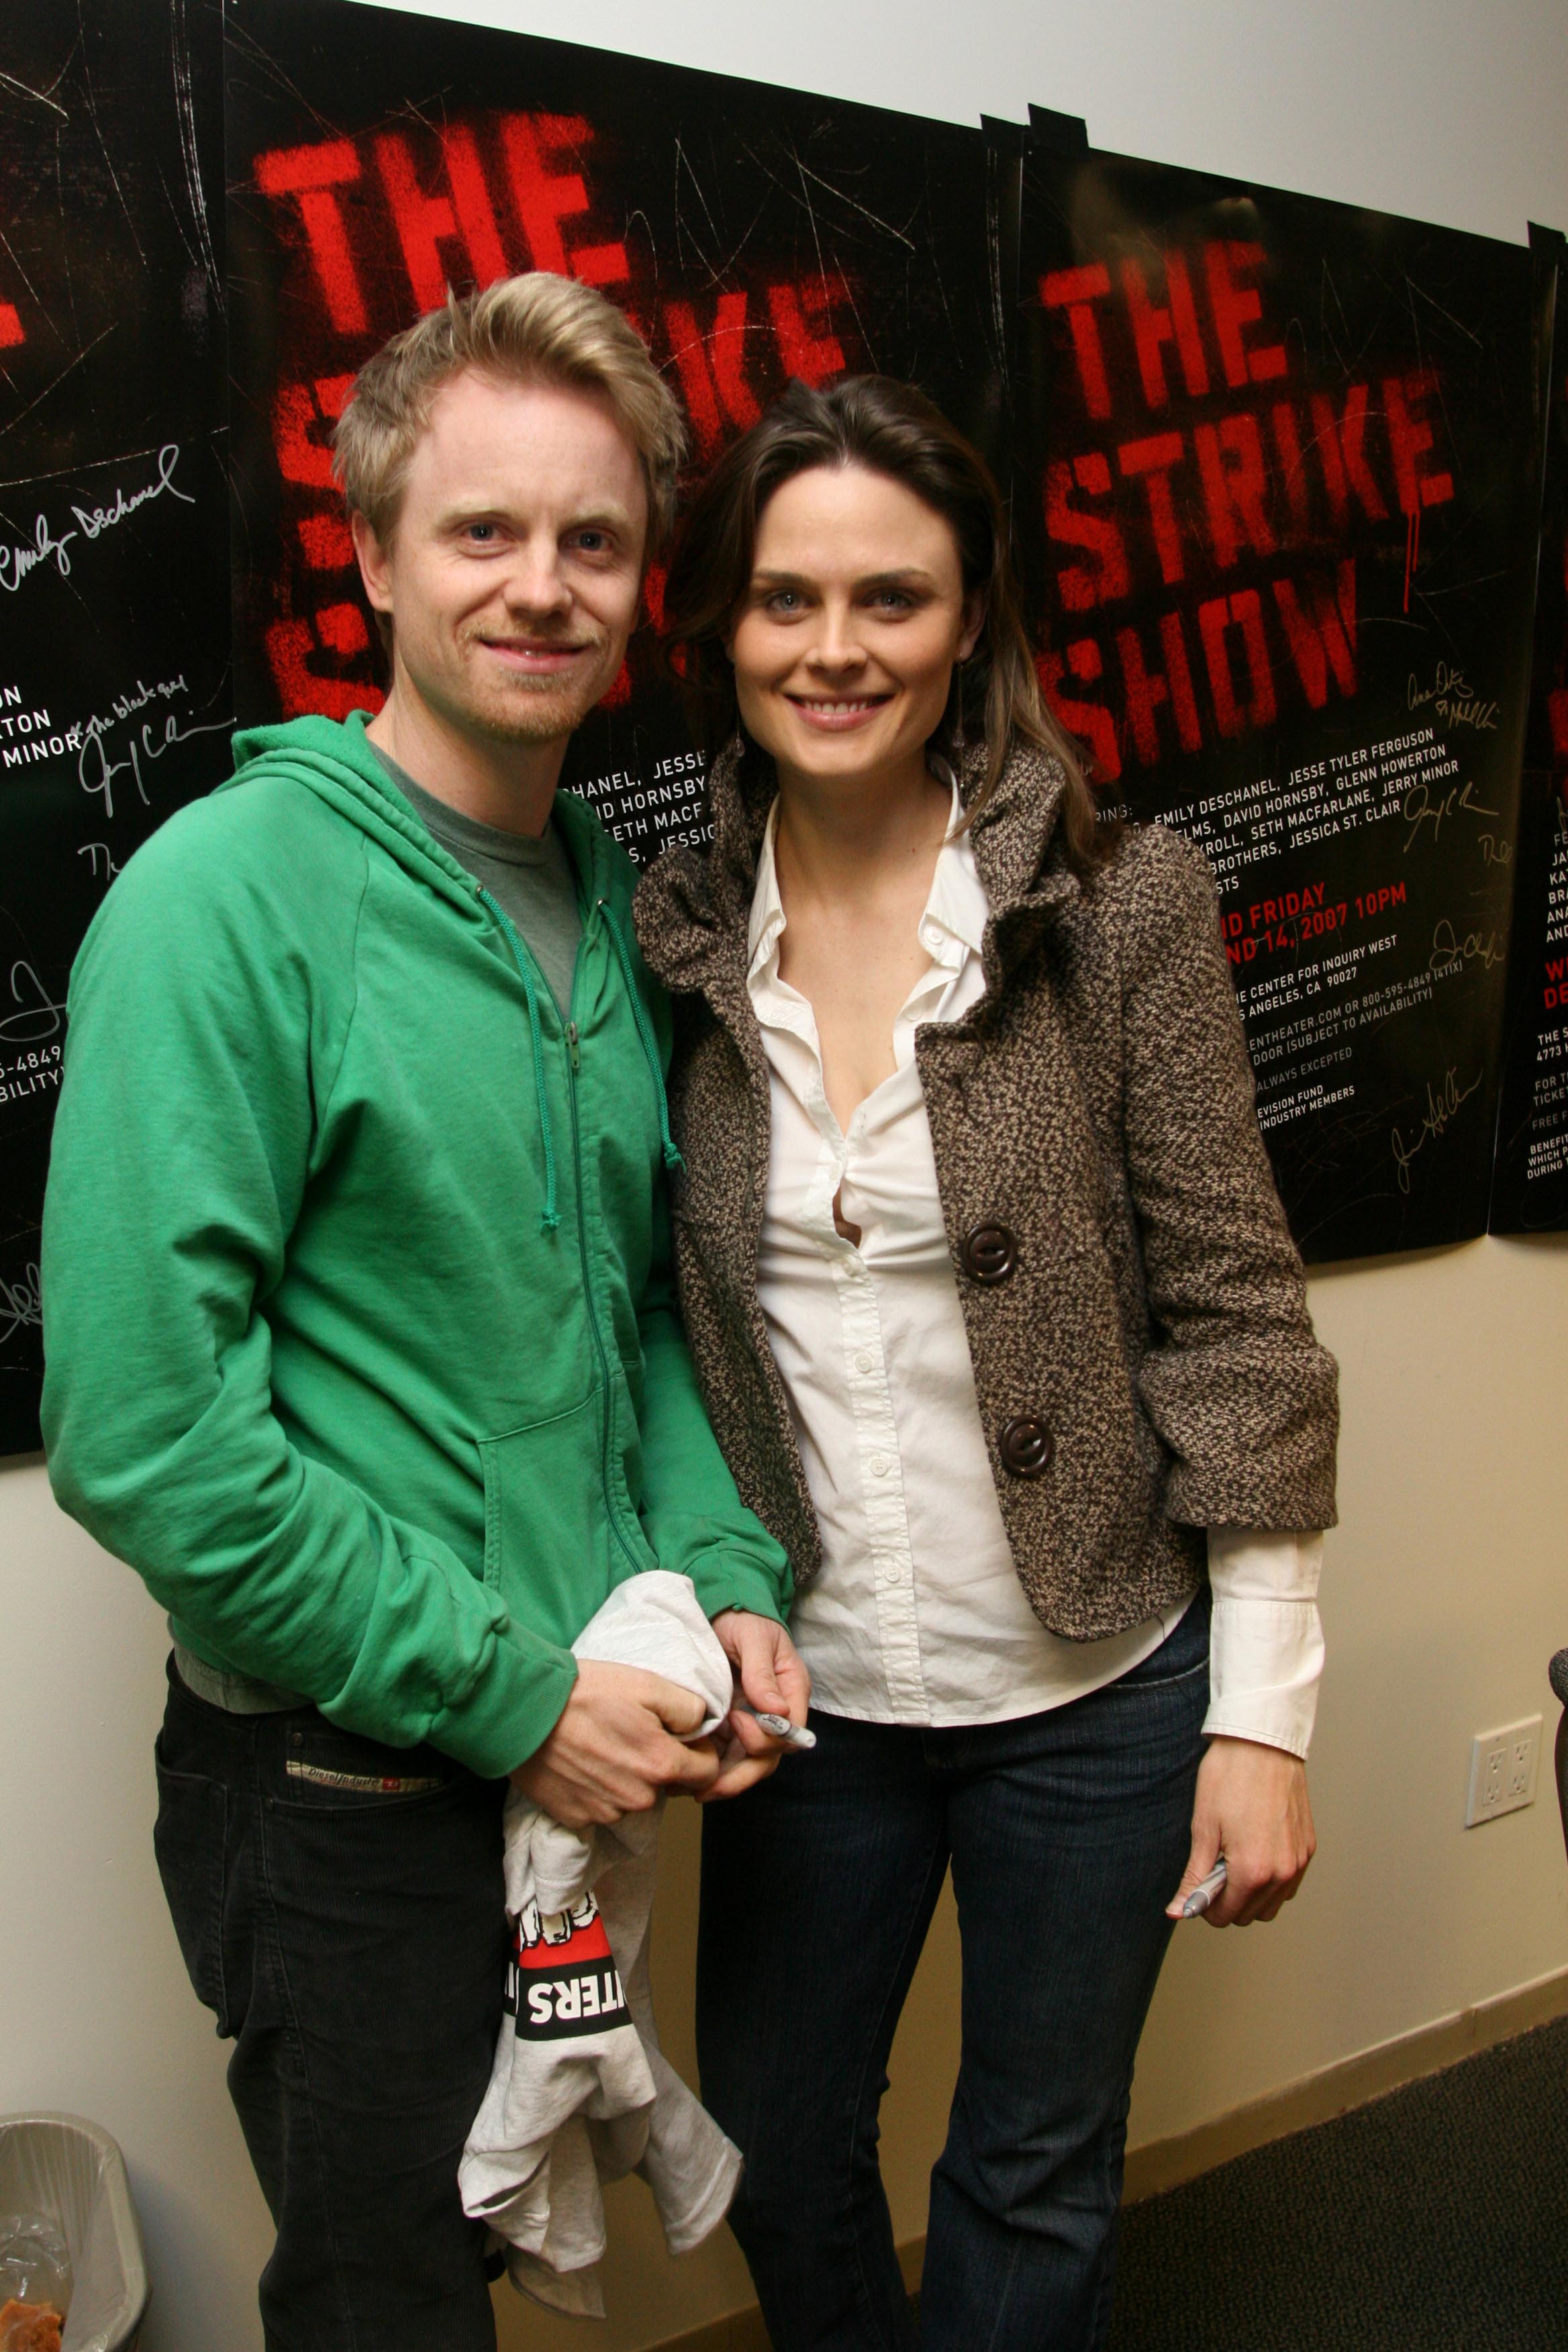 David Hornsby and Emily Deschanel attend The Strike Show to benefit the Motion Picture and Television Fund at the Steve Allen Theatre on December 12, 2007, in Hollywood, California. | Source: Getty Images.